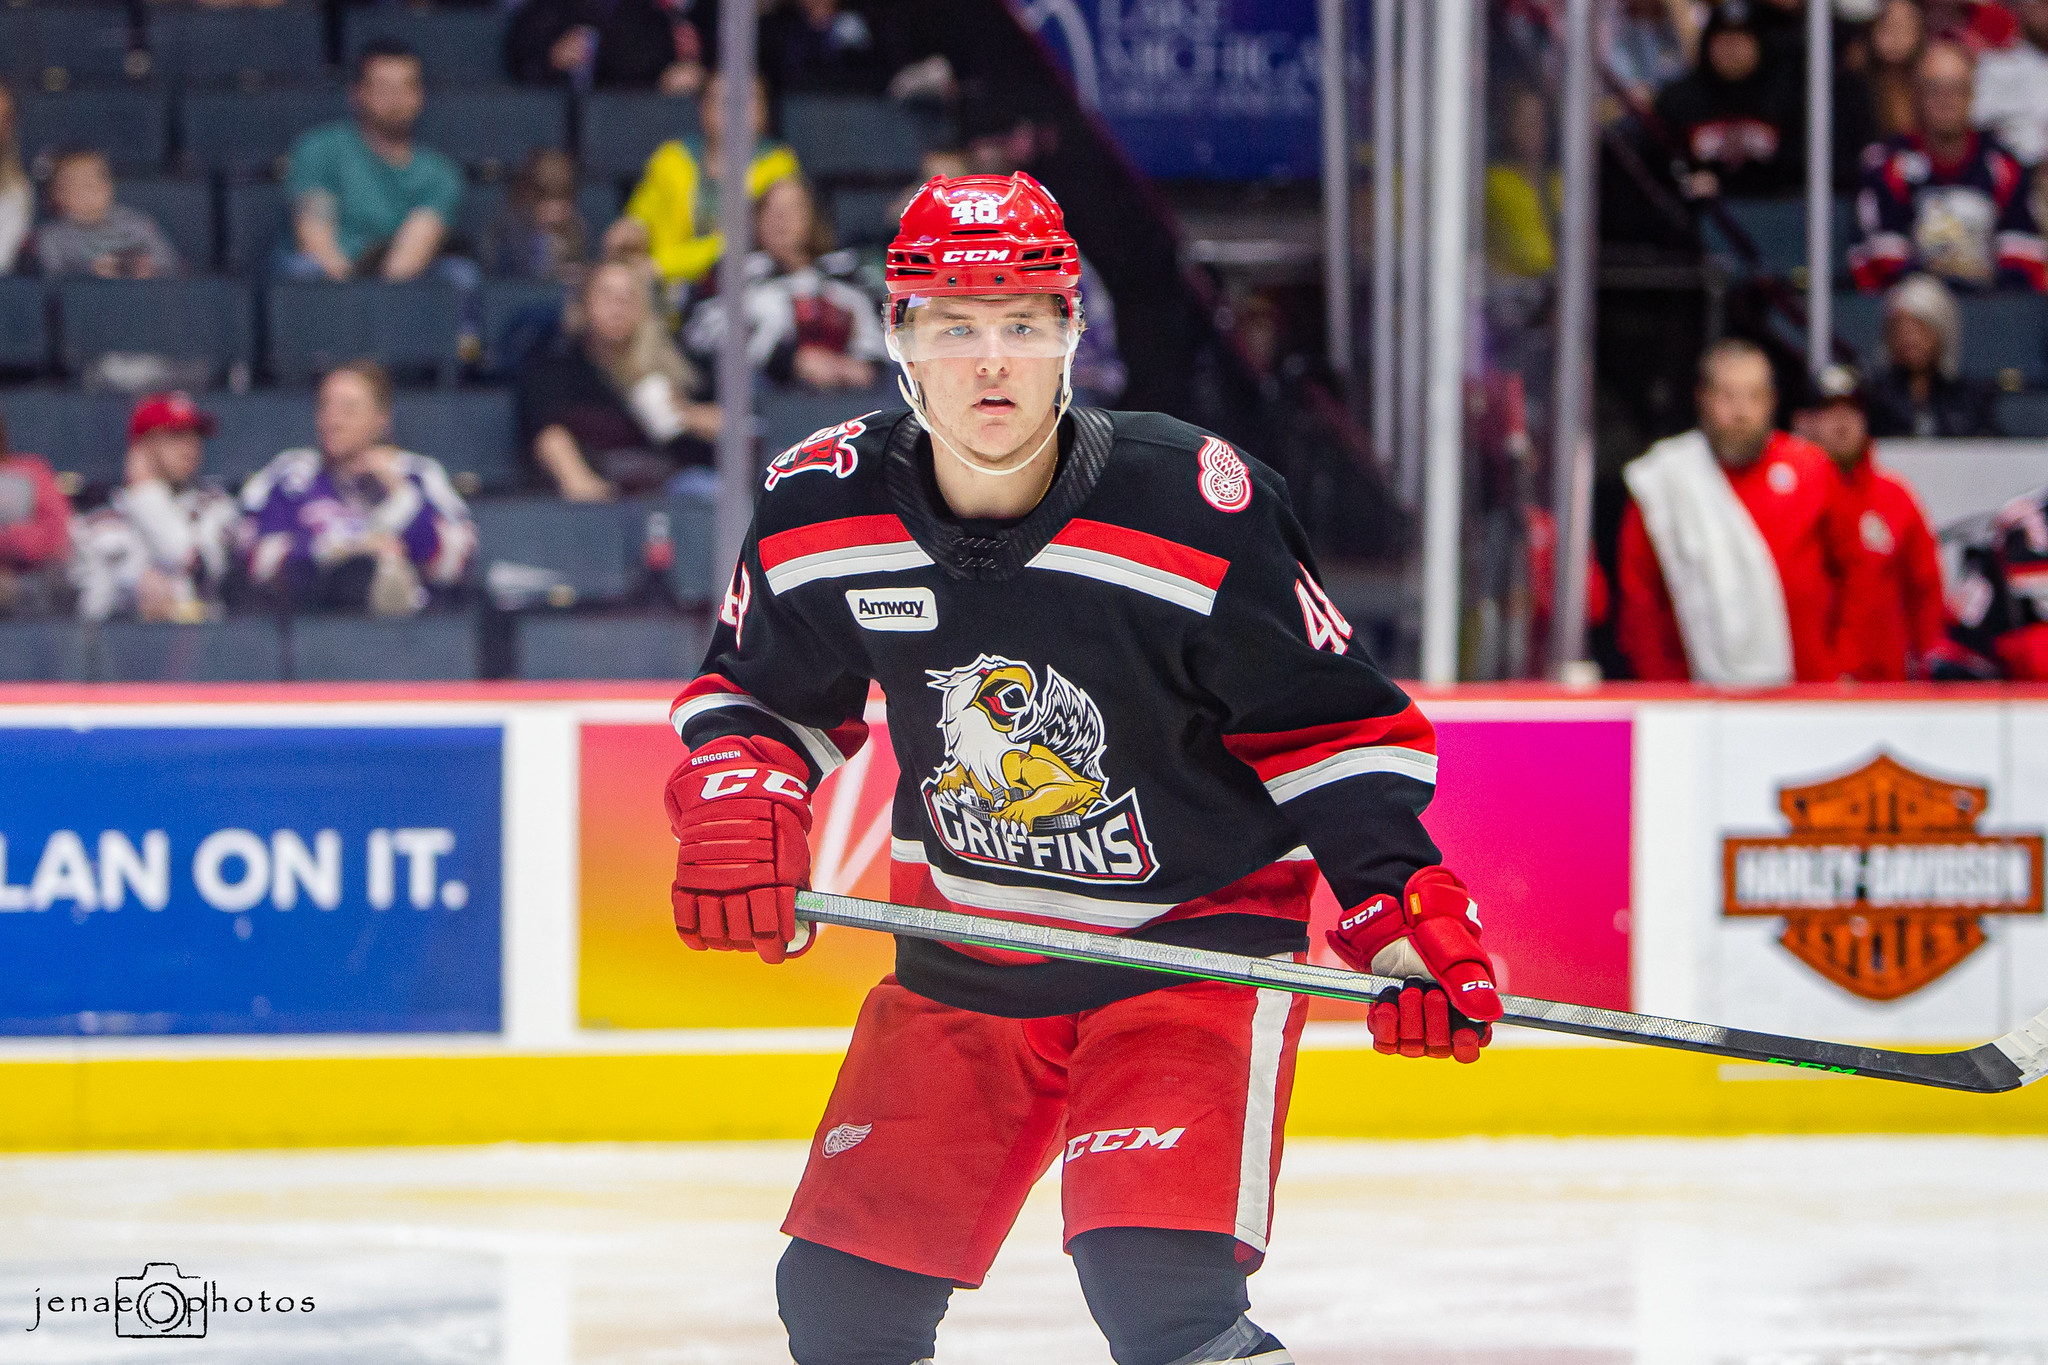 Grand Rapids Griffins unveil new look for 20th season